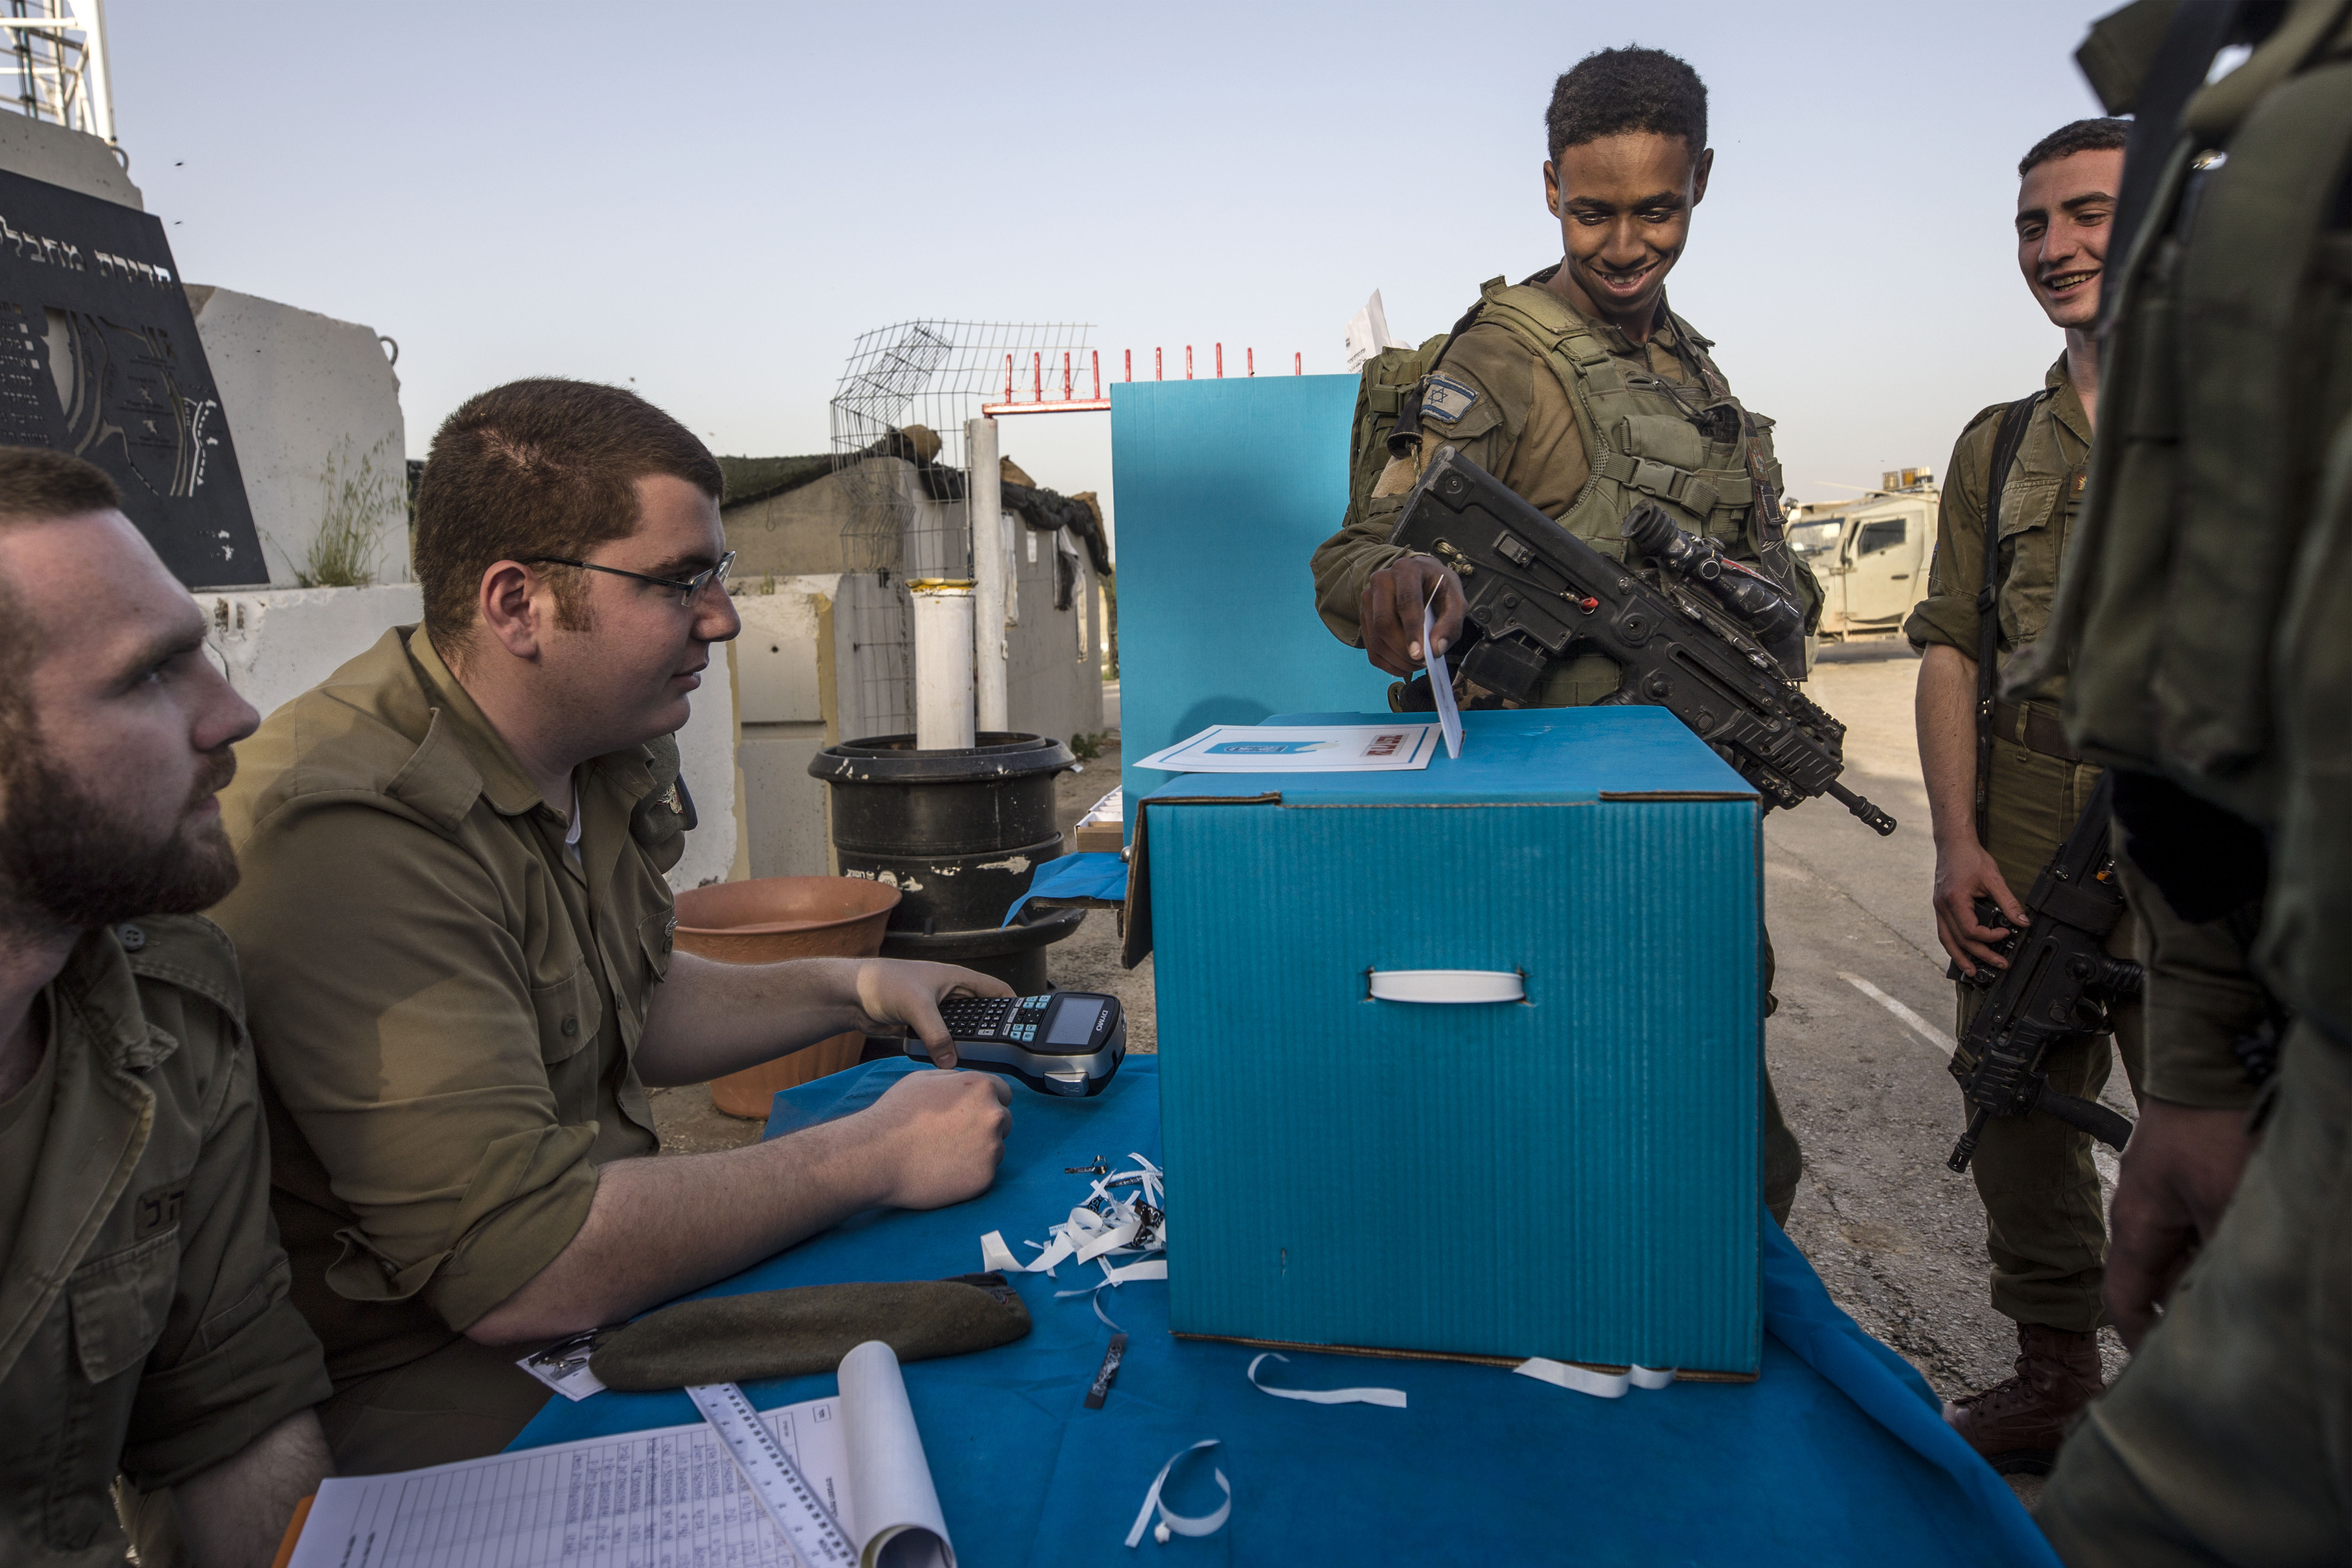 Israeli soldiers cast their ballots oat a mobile voting booth, two days before polling stations open in the rest of Israel, at a military post on the northern Israel and Gaza border, Sunday, April 7, 2019. (AP Photo/Tsafrir Abayov)